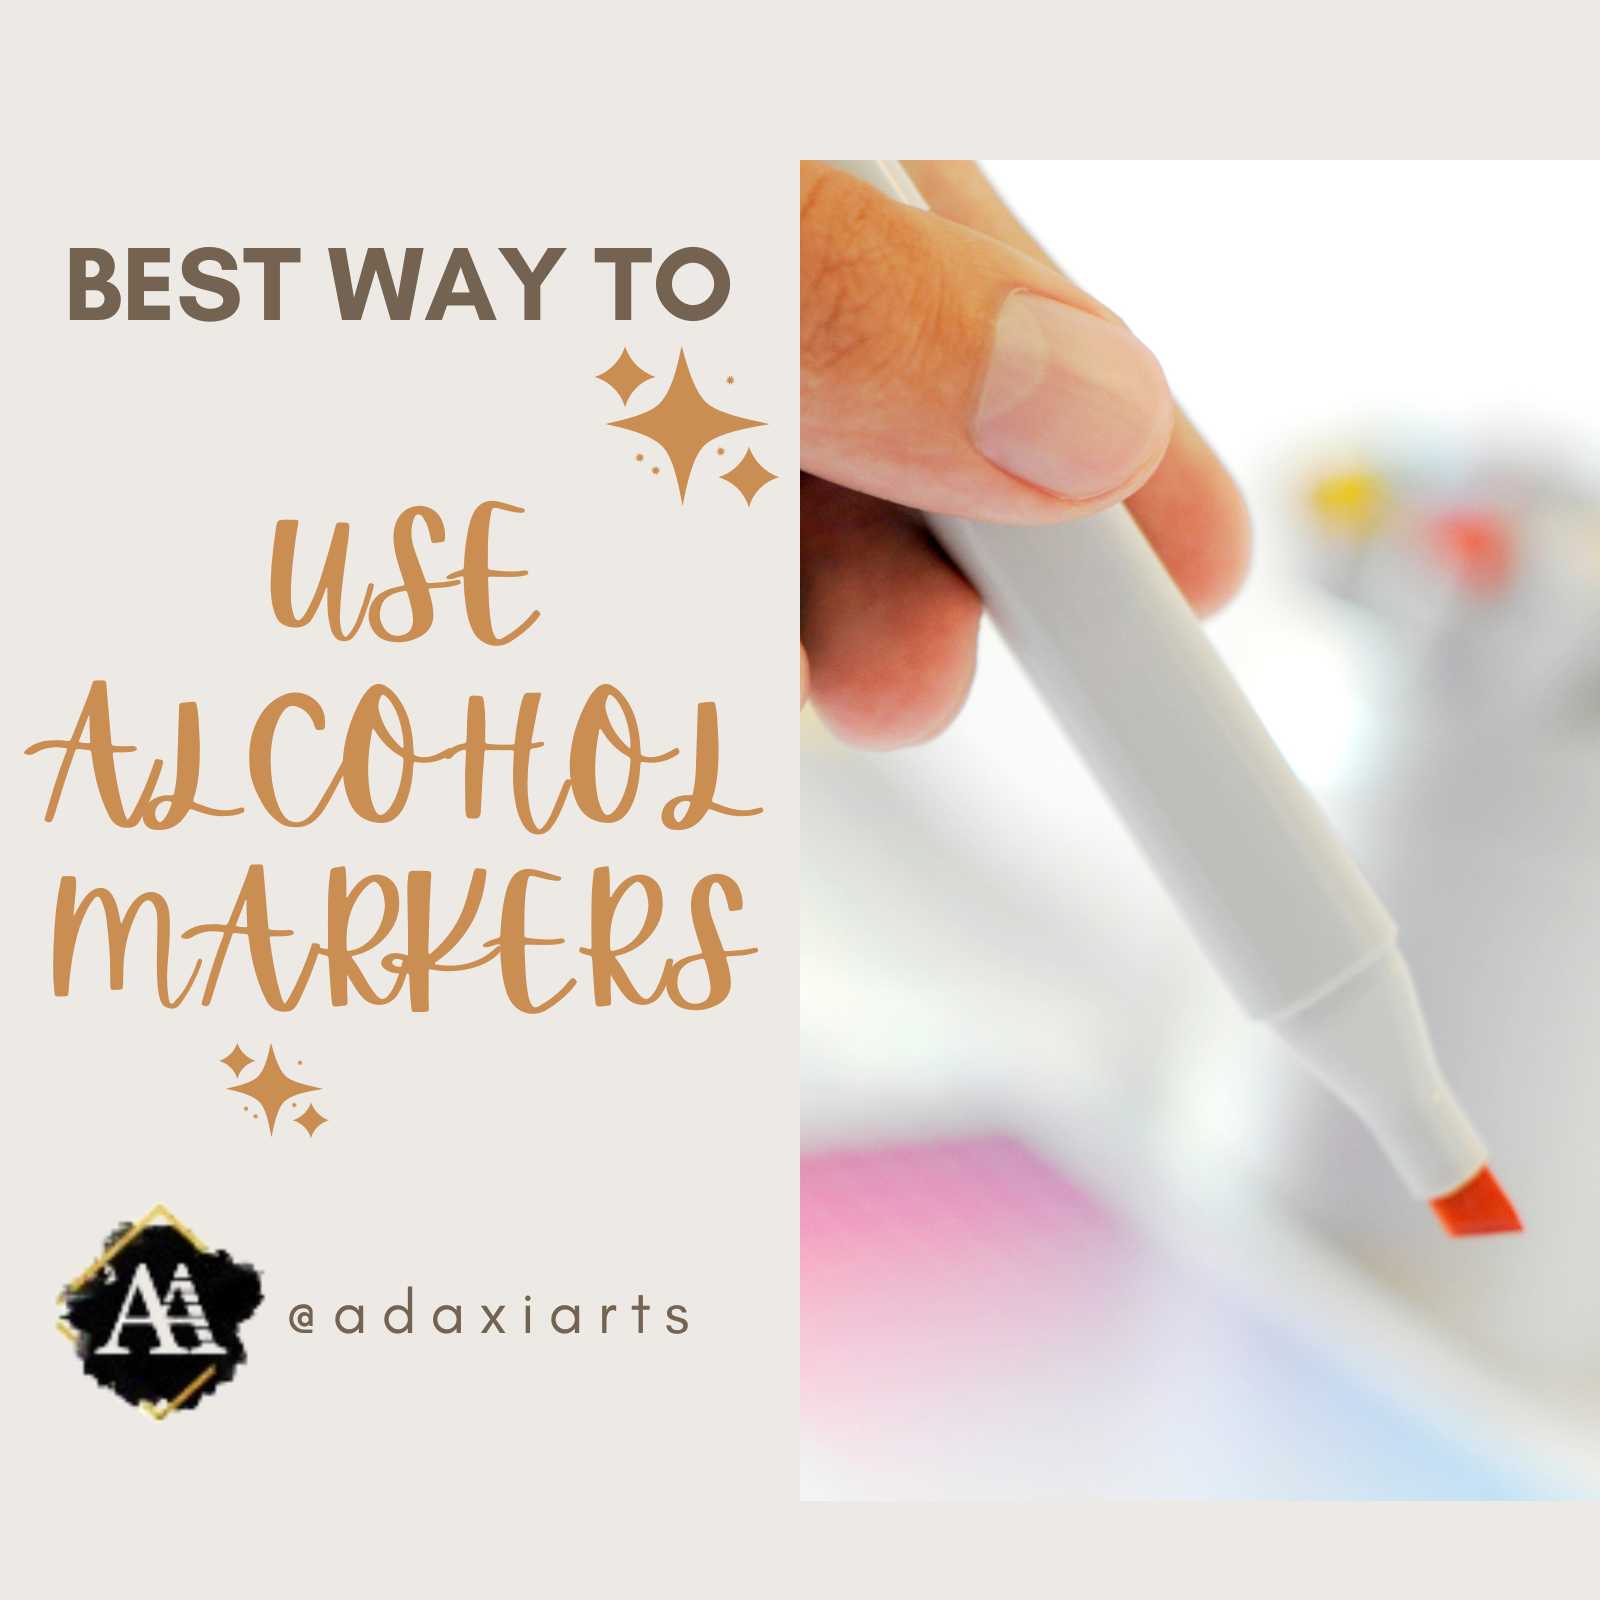 How to Use Alcohol Markers